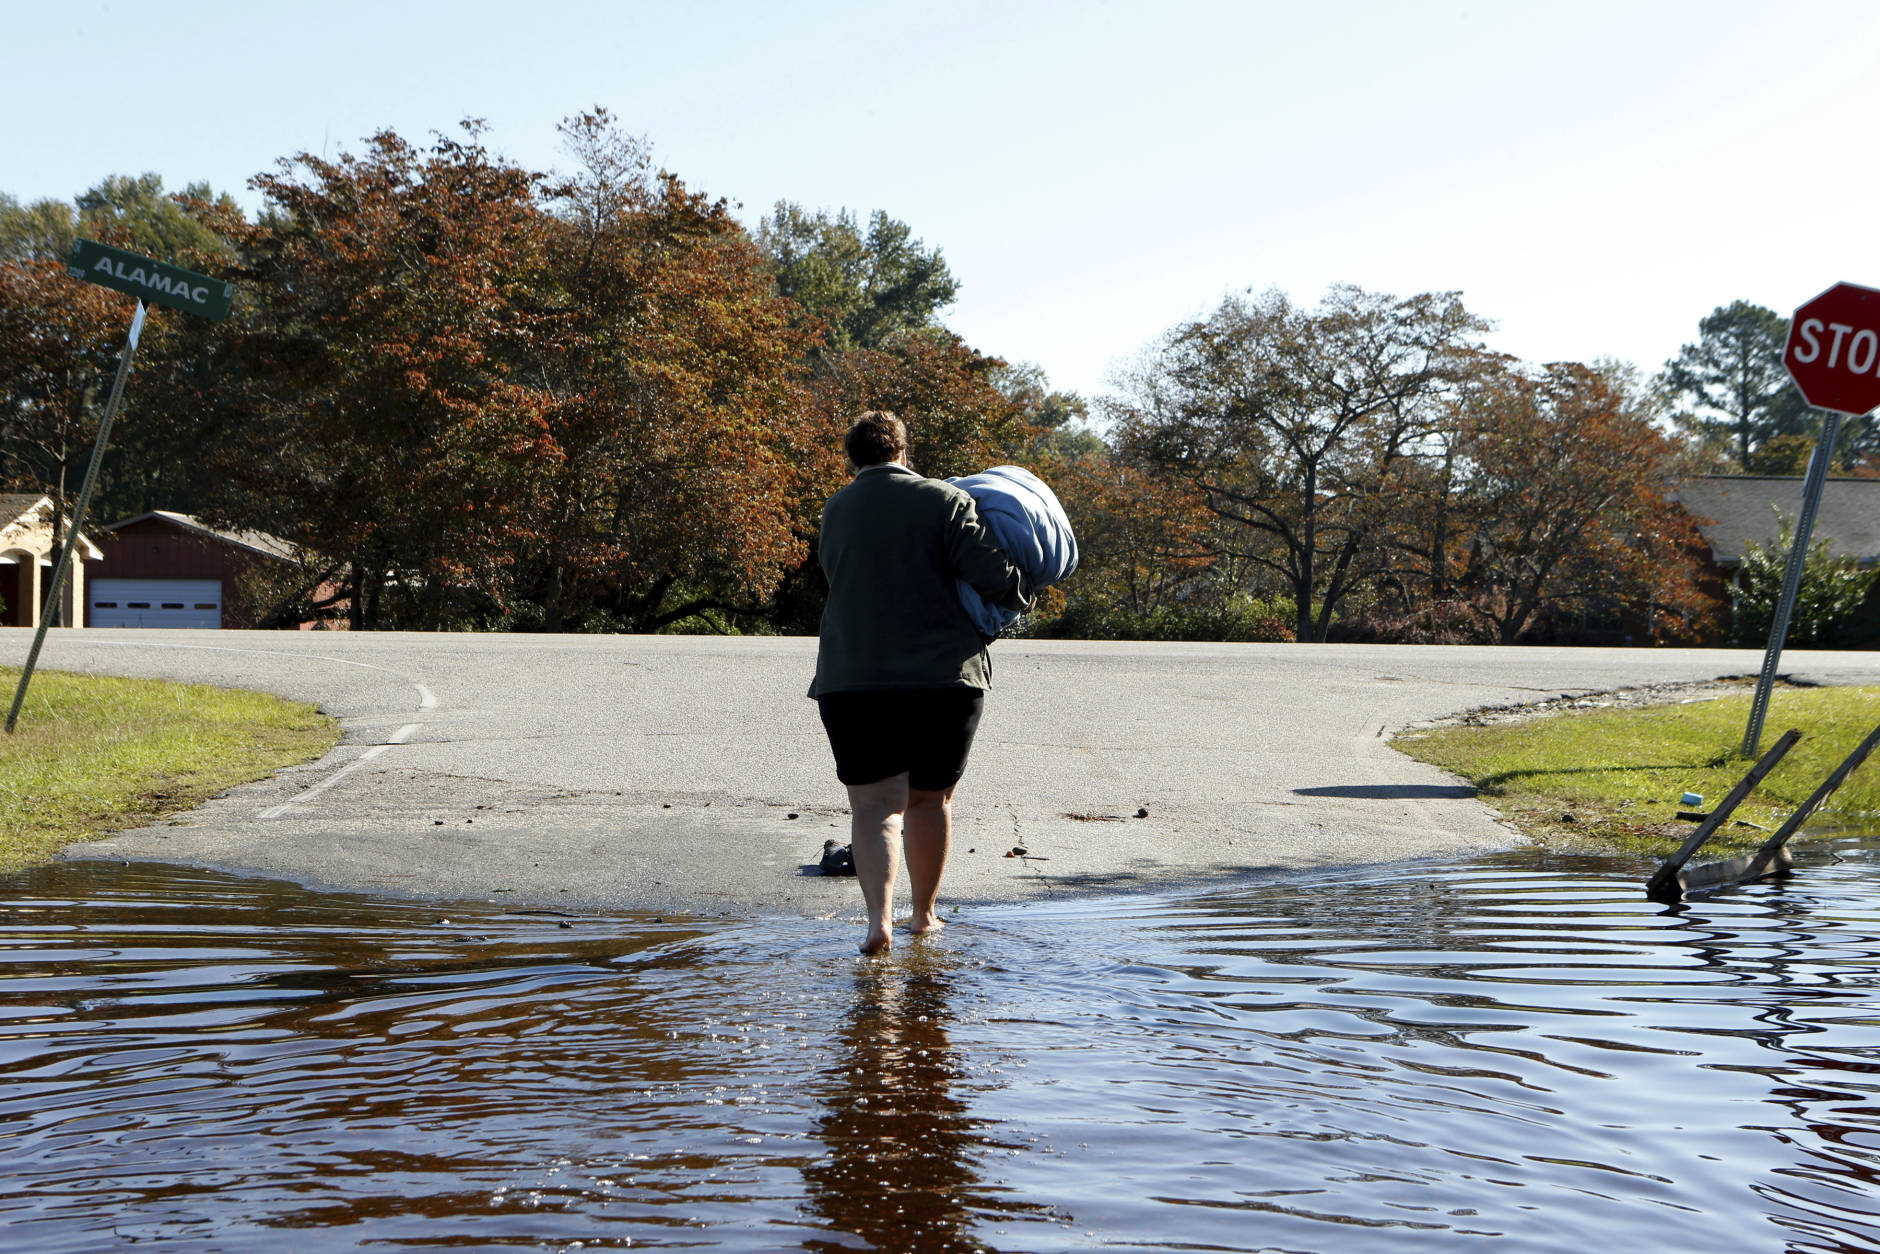 Janet Meier makes her way out of the floodwaters associated with Hurricane Matthew surrounding her home after retrieving a warm blanket and her laptop computer from her home on Thursday, Oct. 13, 2016, in Lumberton, N.C.  About 1,200 Lumberton residents had to be evacuated by boat and plucked from their roofs by helicopters as the river crested. (AP Photo/Brian Blanco)